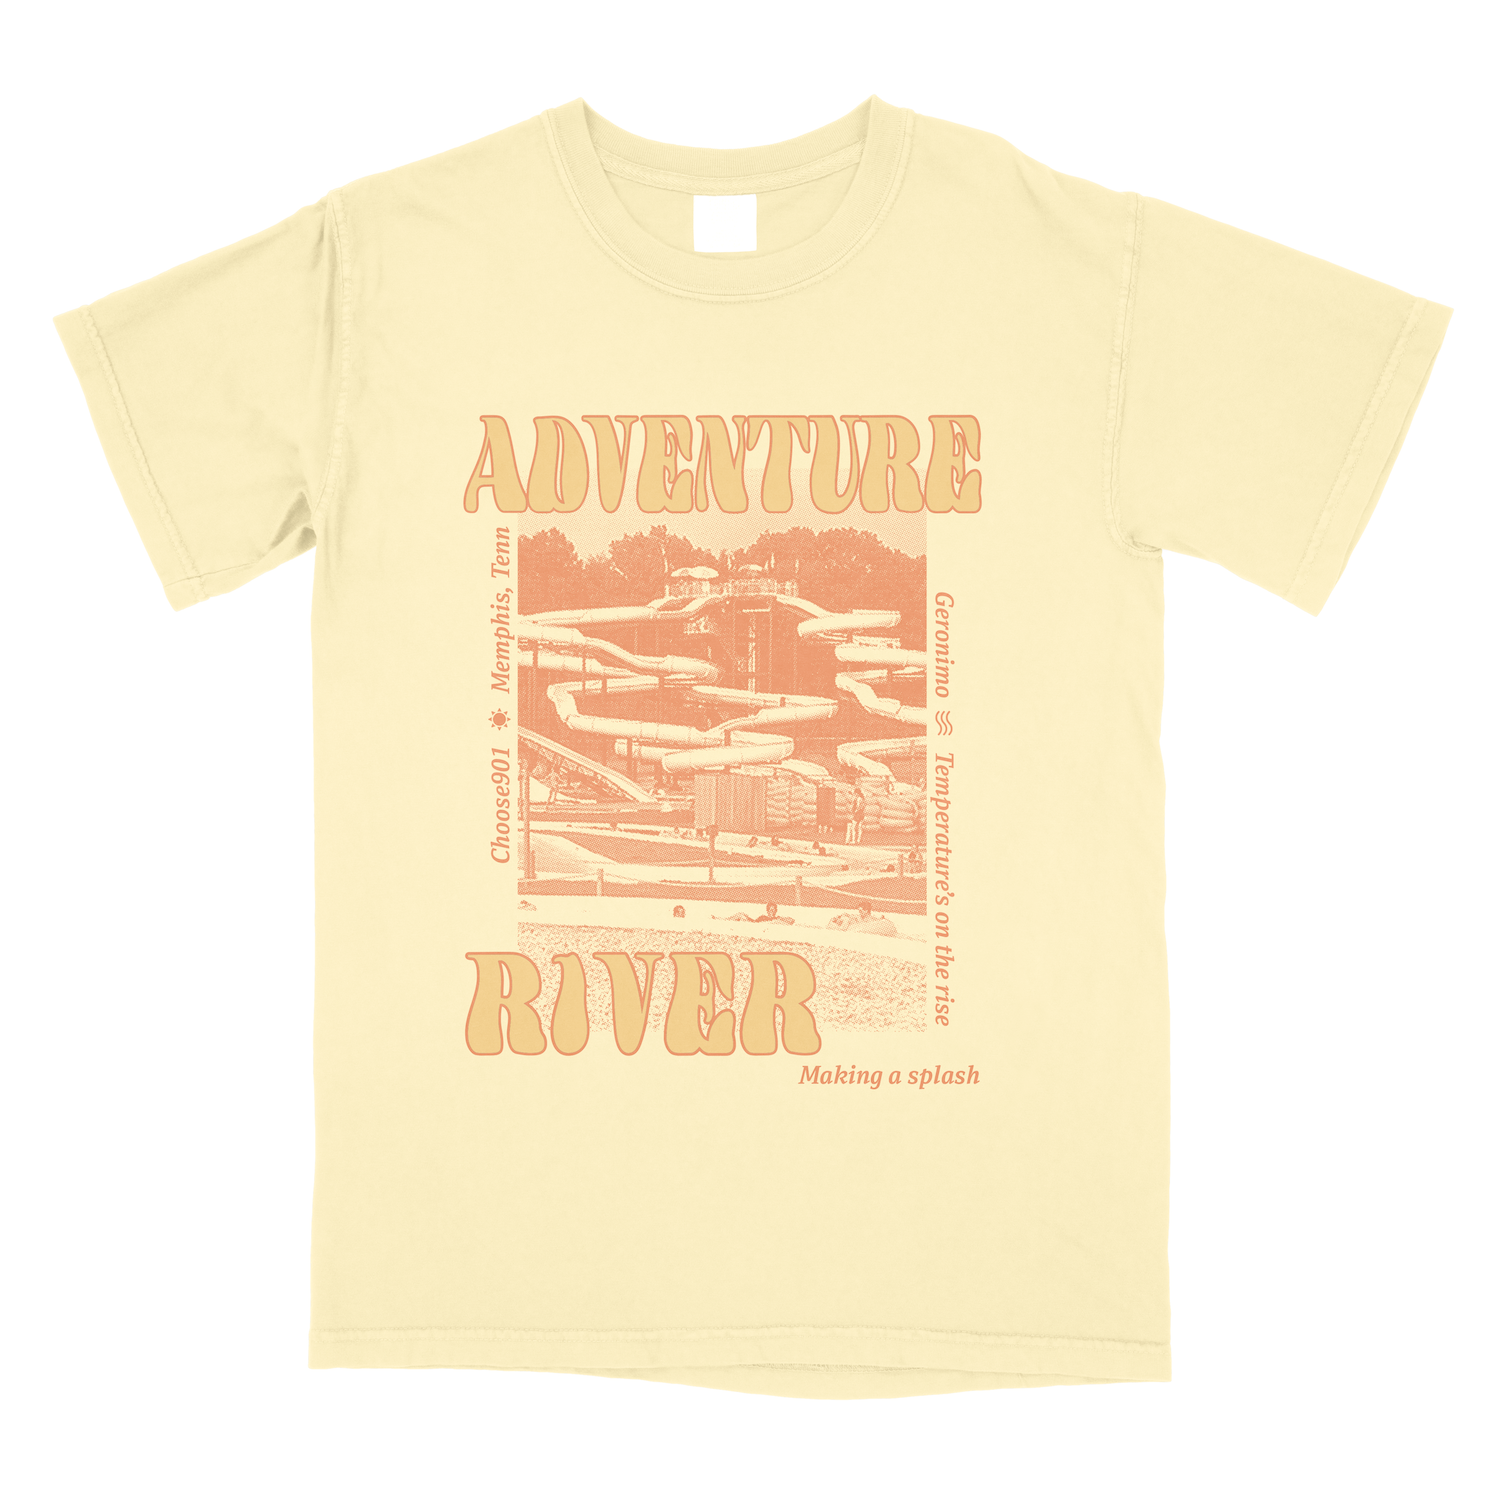 Choose901 Adventure River Shirt Yellow featuring a bridge and Memphis water theme.